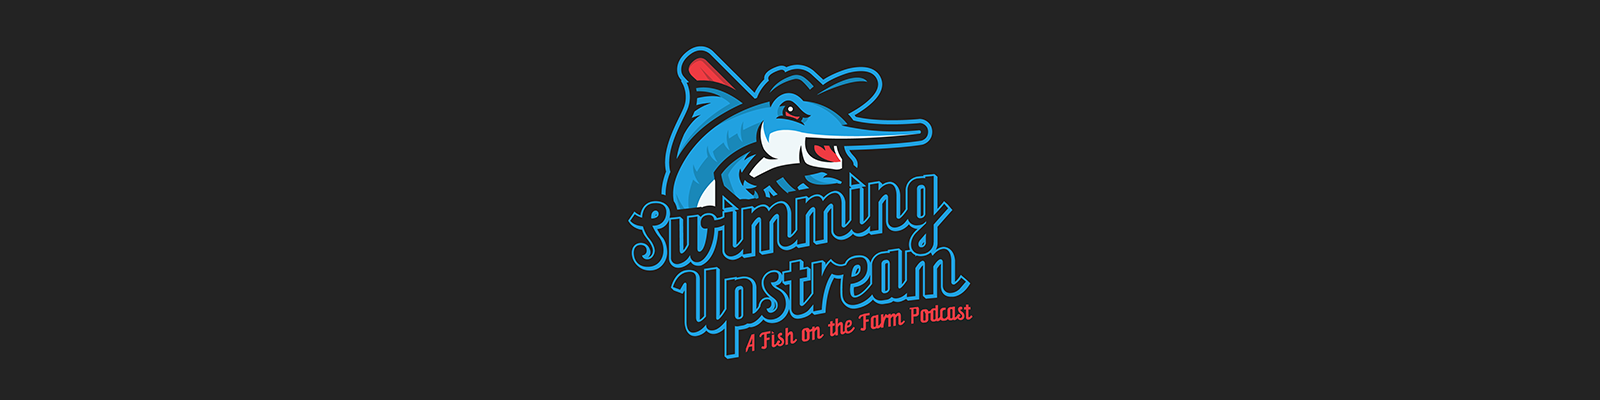 Swimming Upstream - A Fish on the Farm Podcast